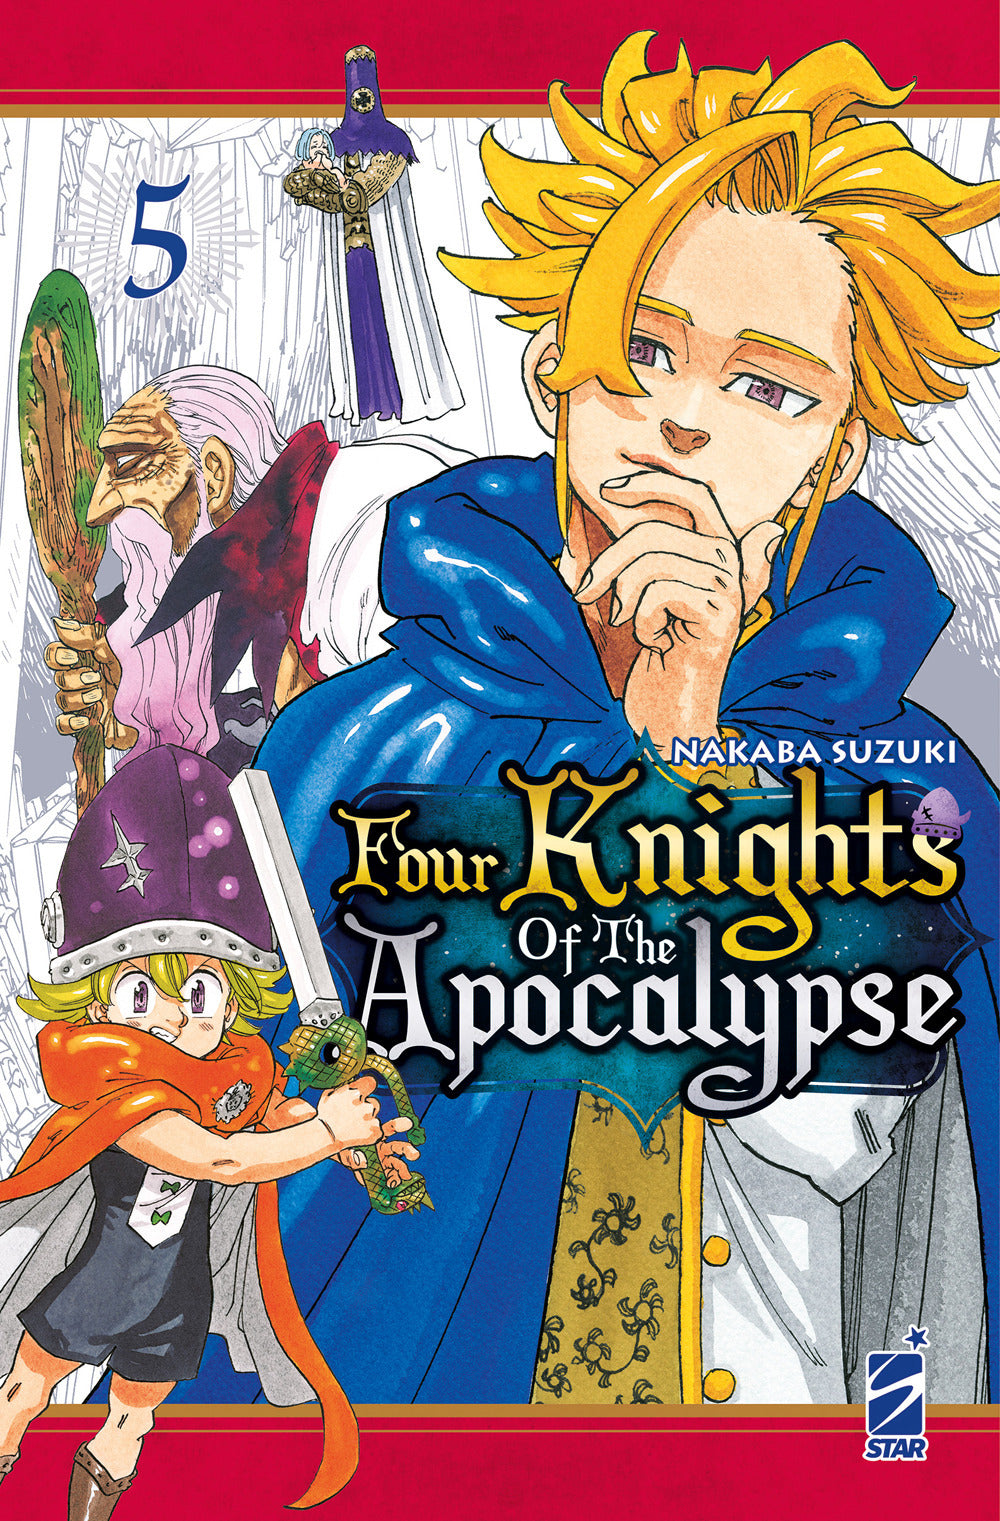 Four knights of the apocalypse. Vol. 5